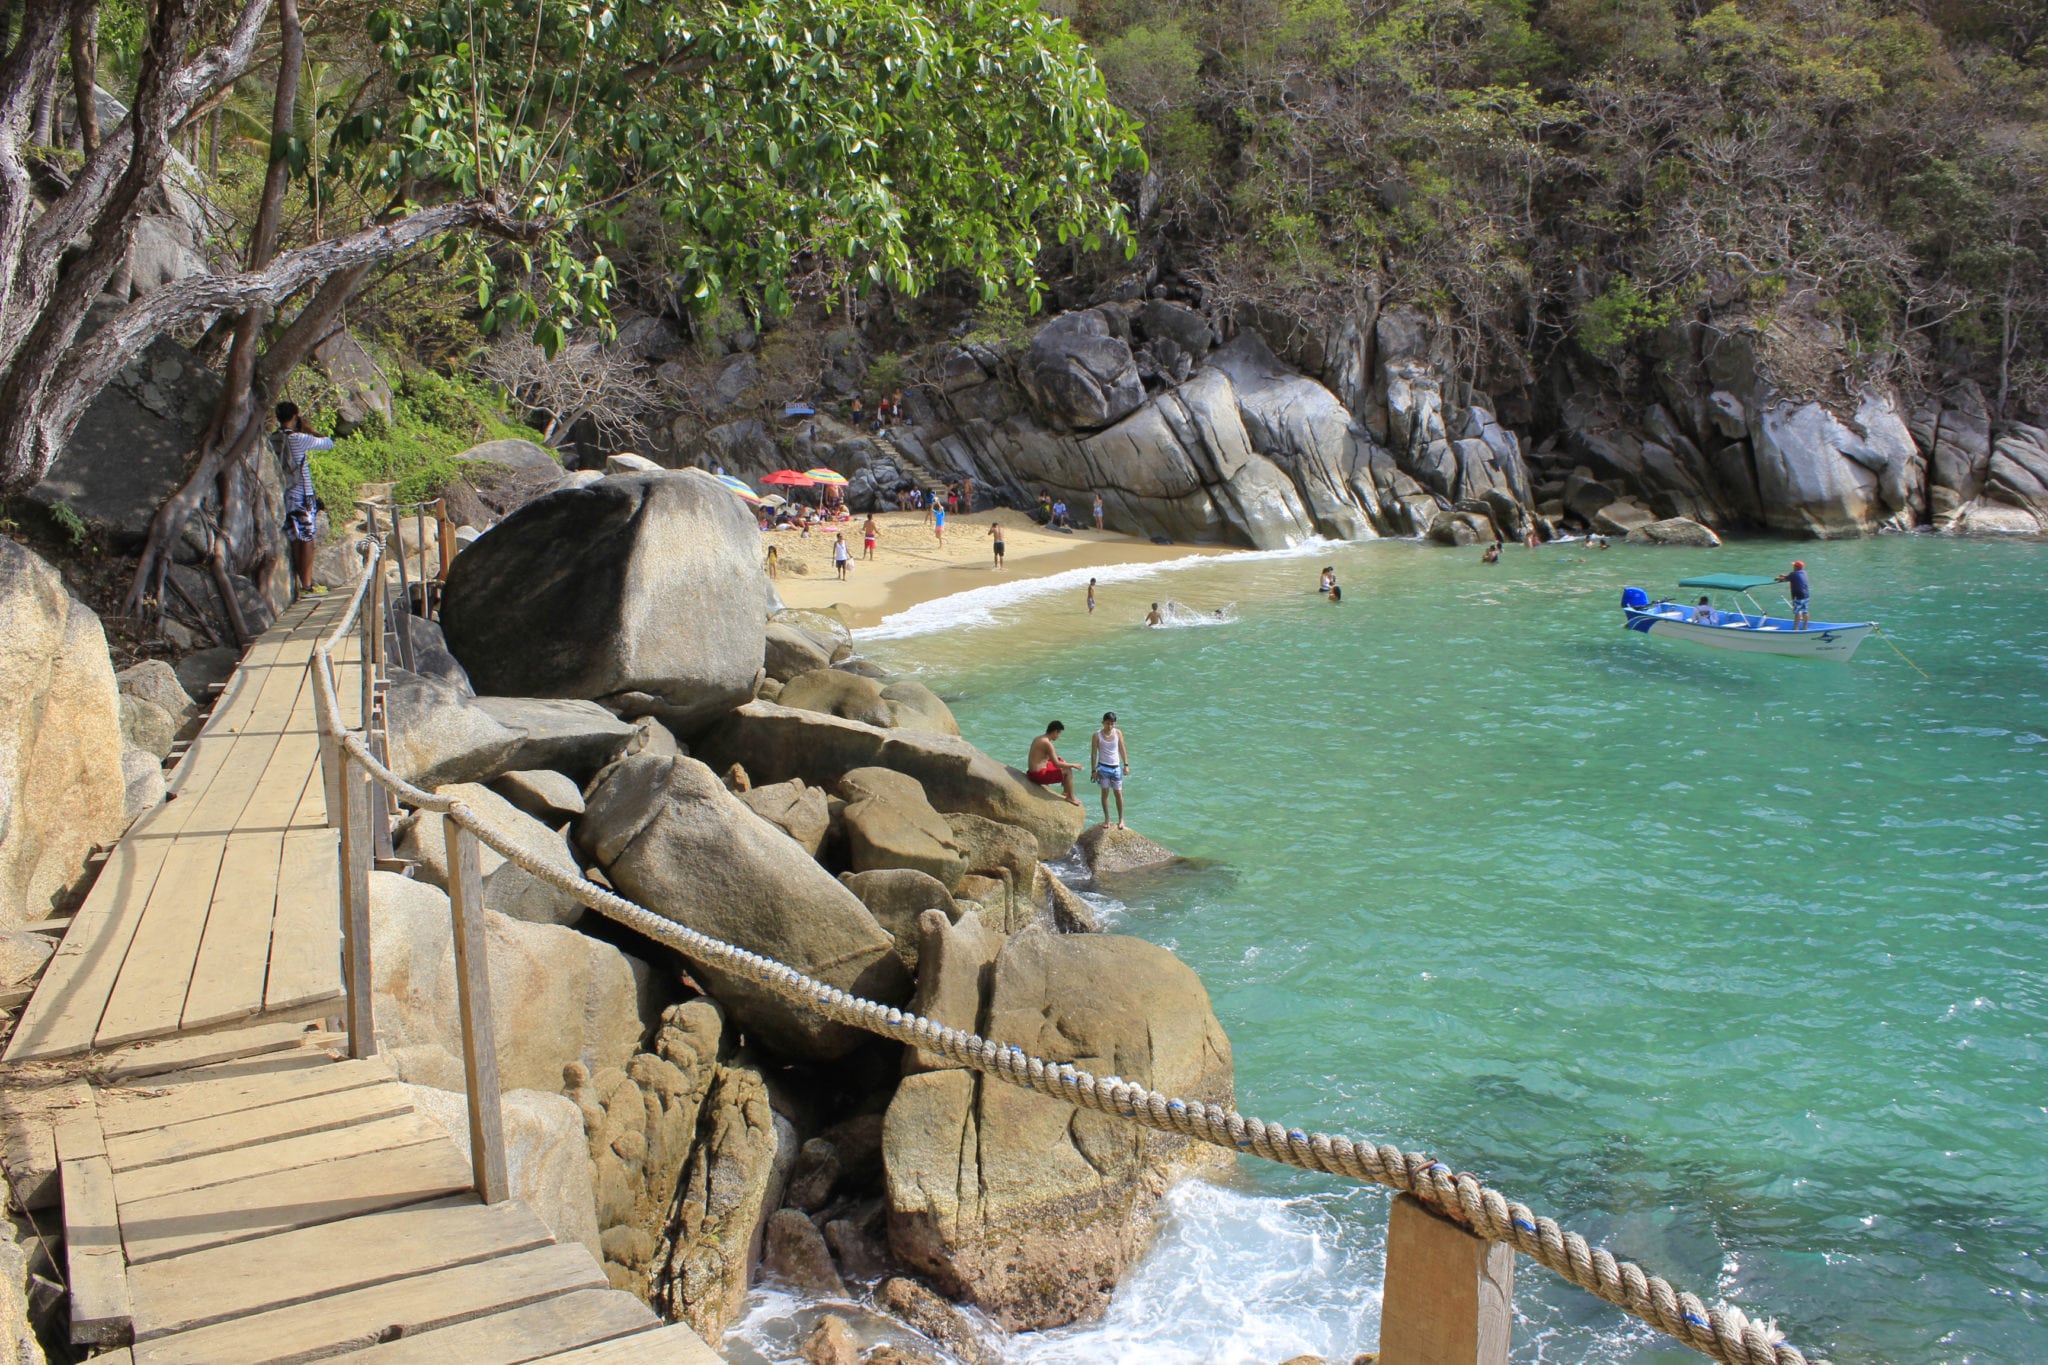 People swimming in a small cove on Banderas Bay